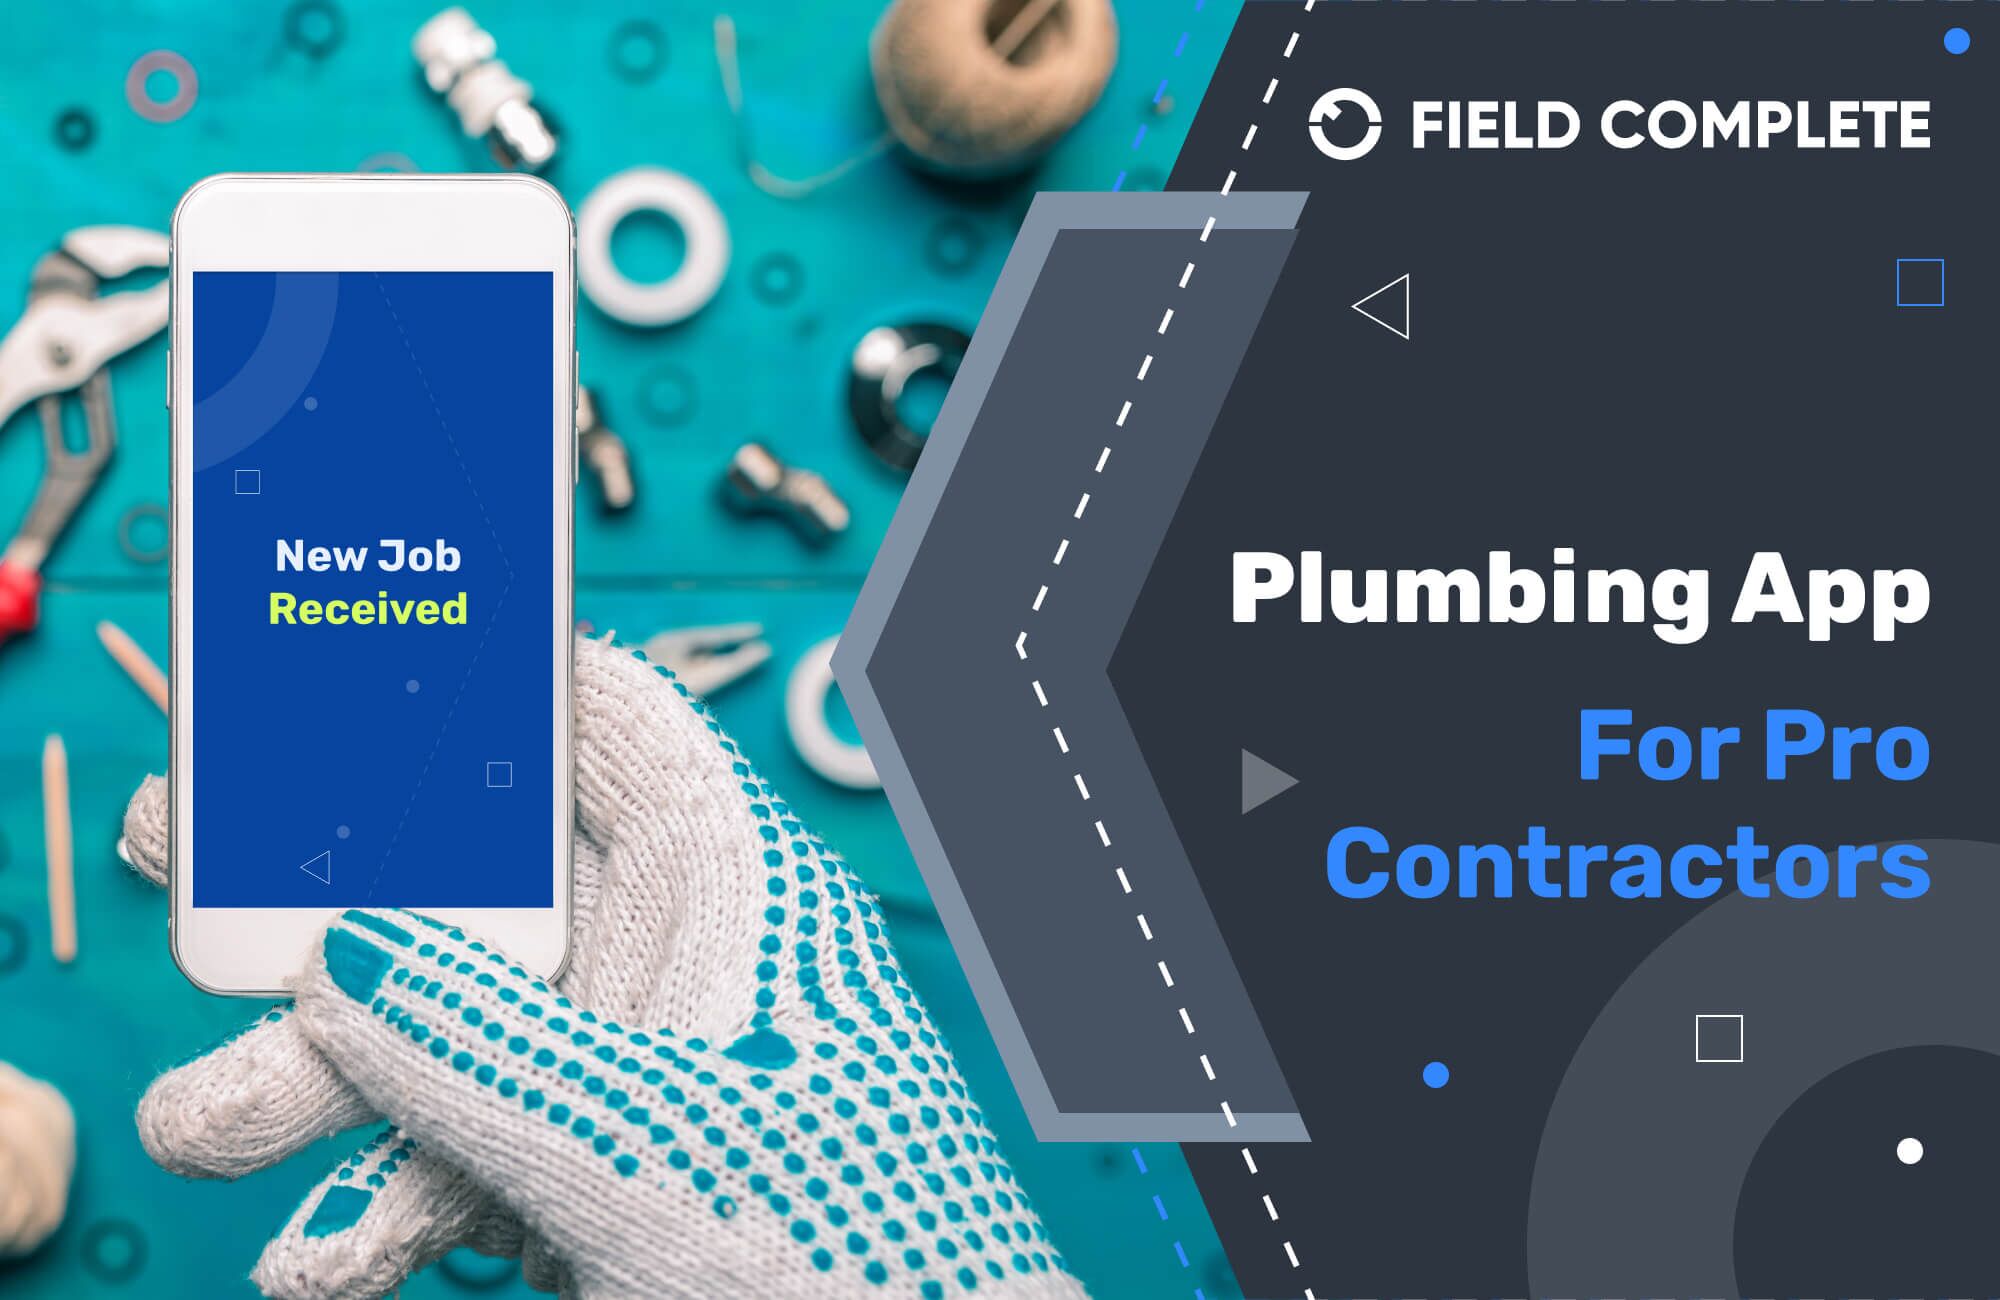 How to Become a Pro Contractor Using a Plumbing App